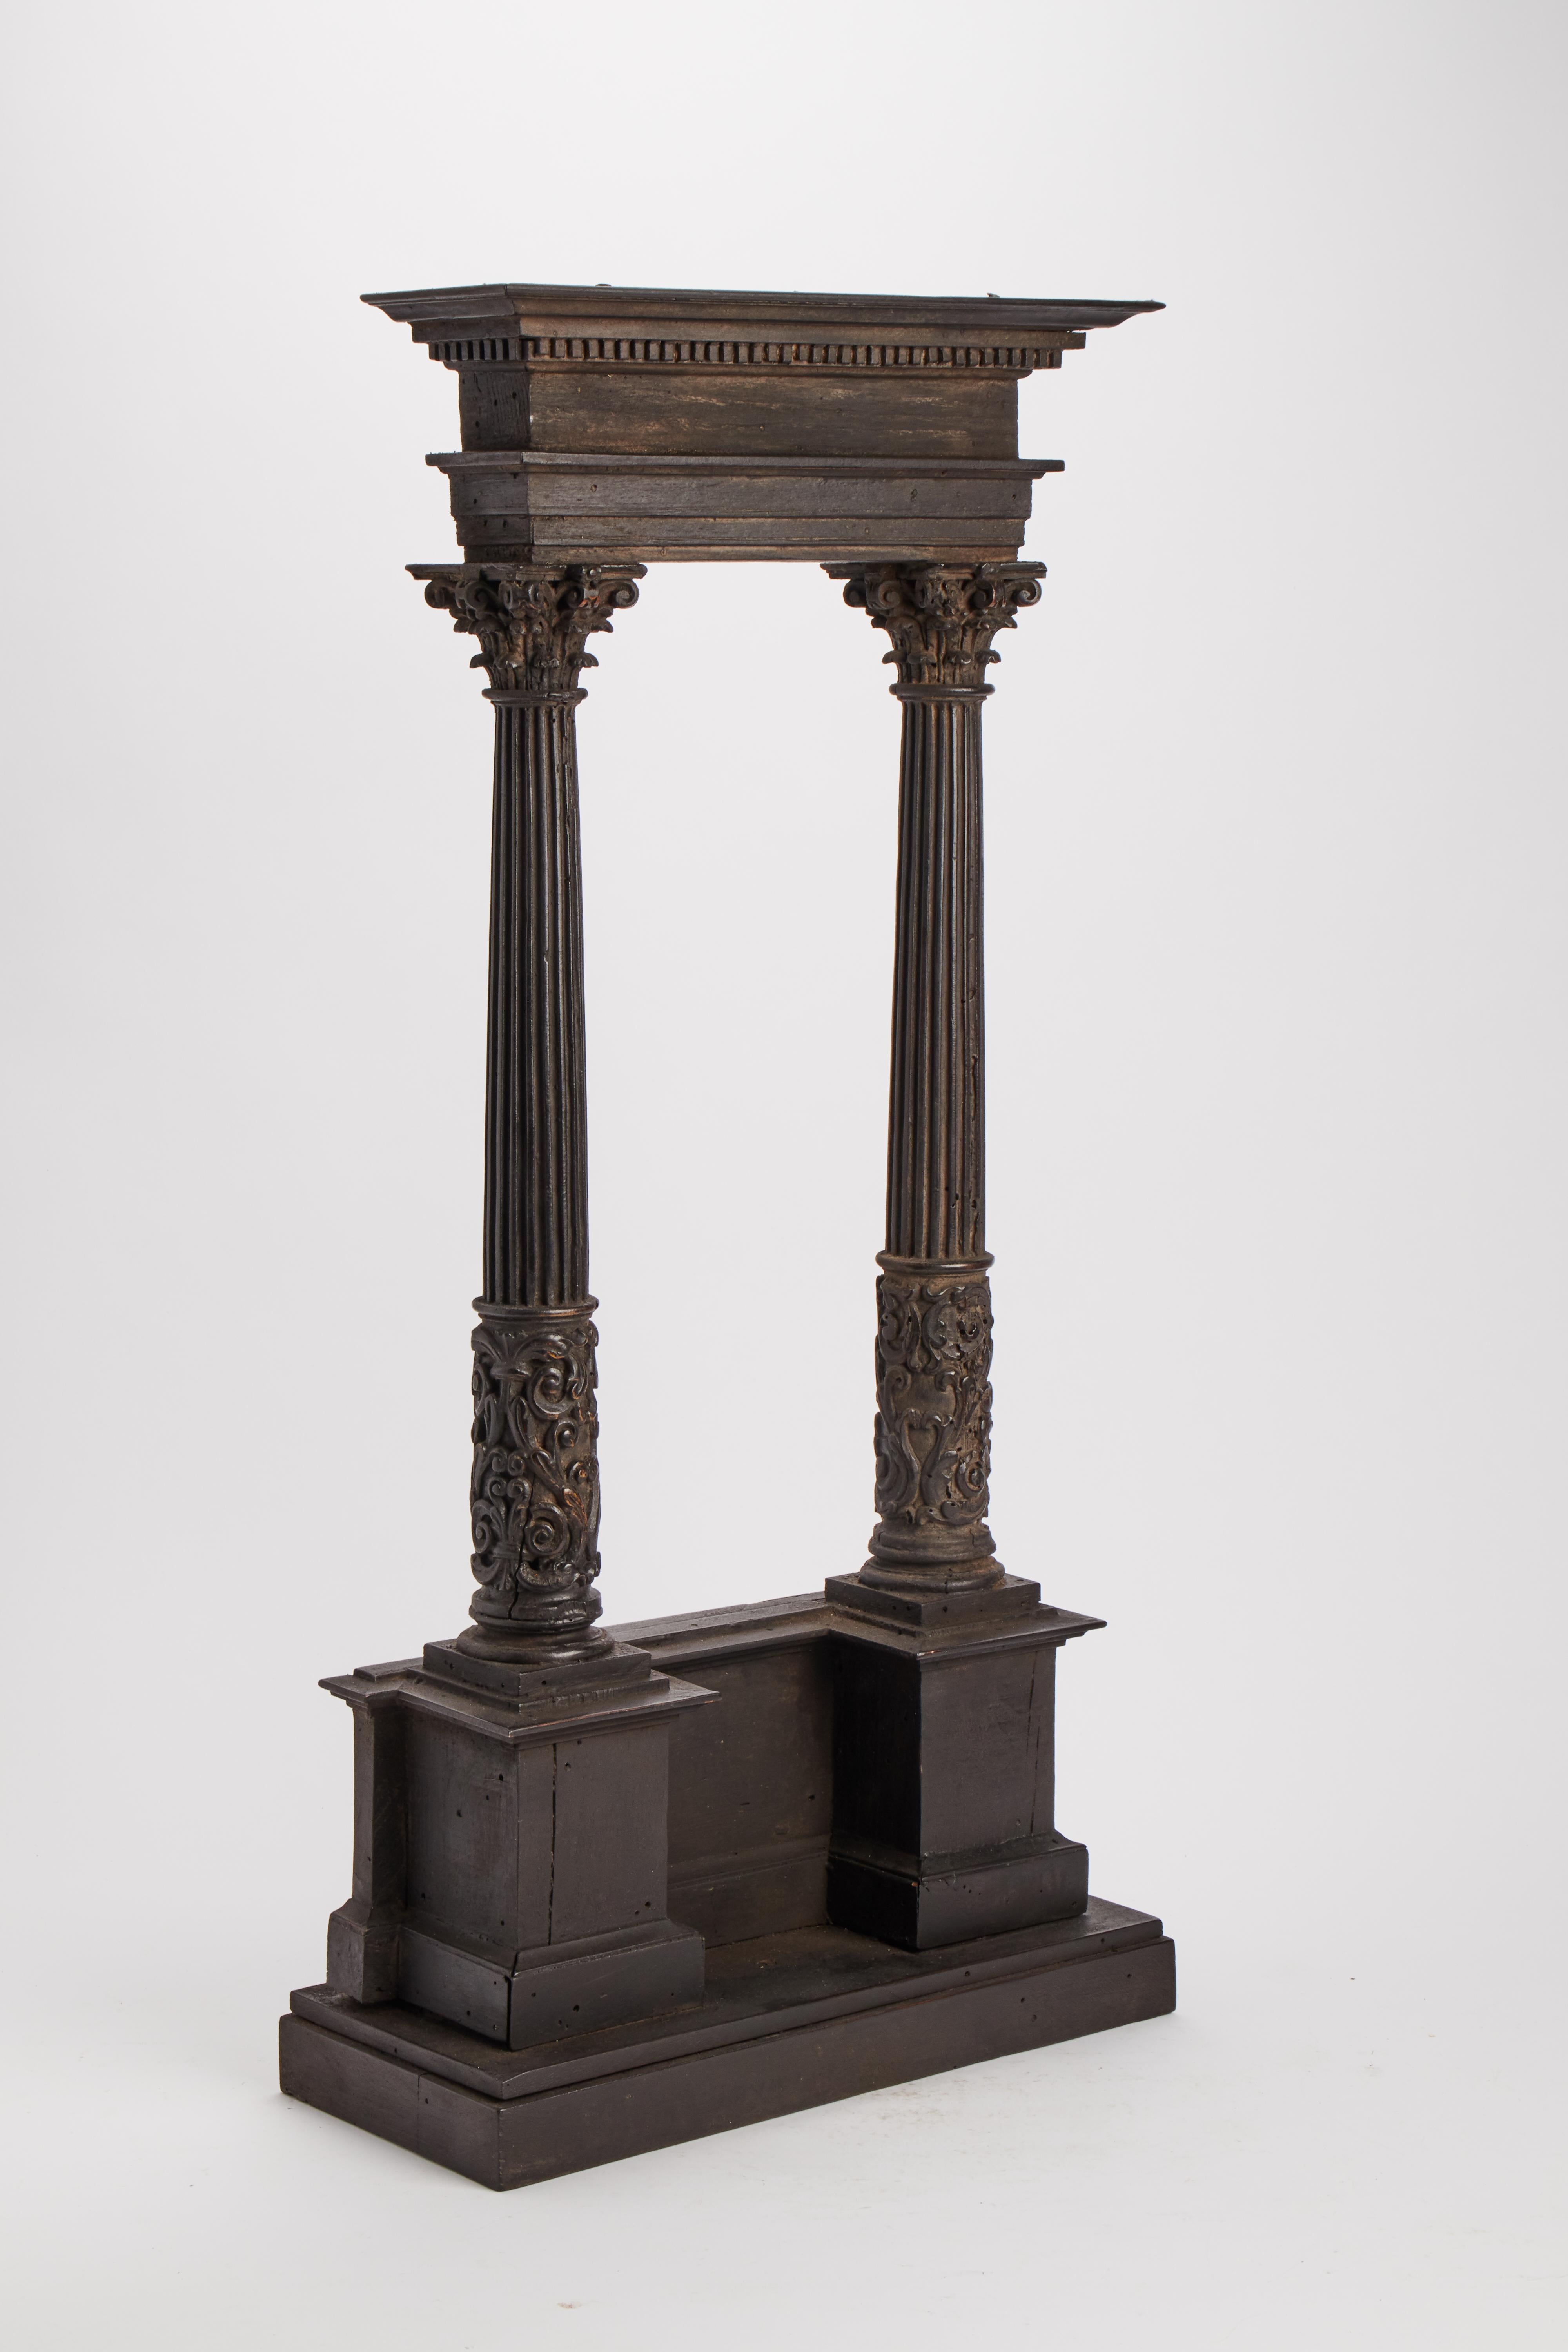 Wooden maquette for Wunderkammer, of an architectural model depicting two columns with Corinthian capitals holding up an entablature. Several fruitwood species, original patina. Italy mid-17th century.